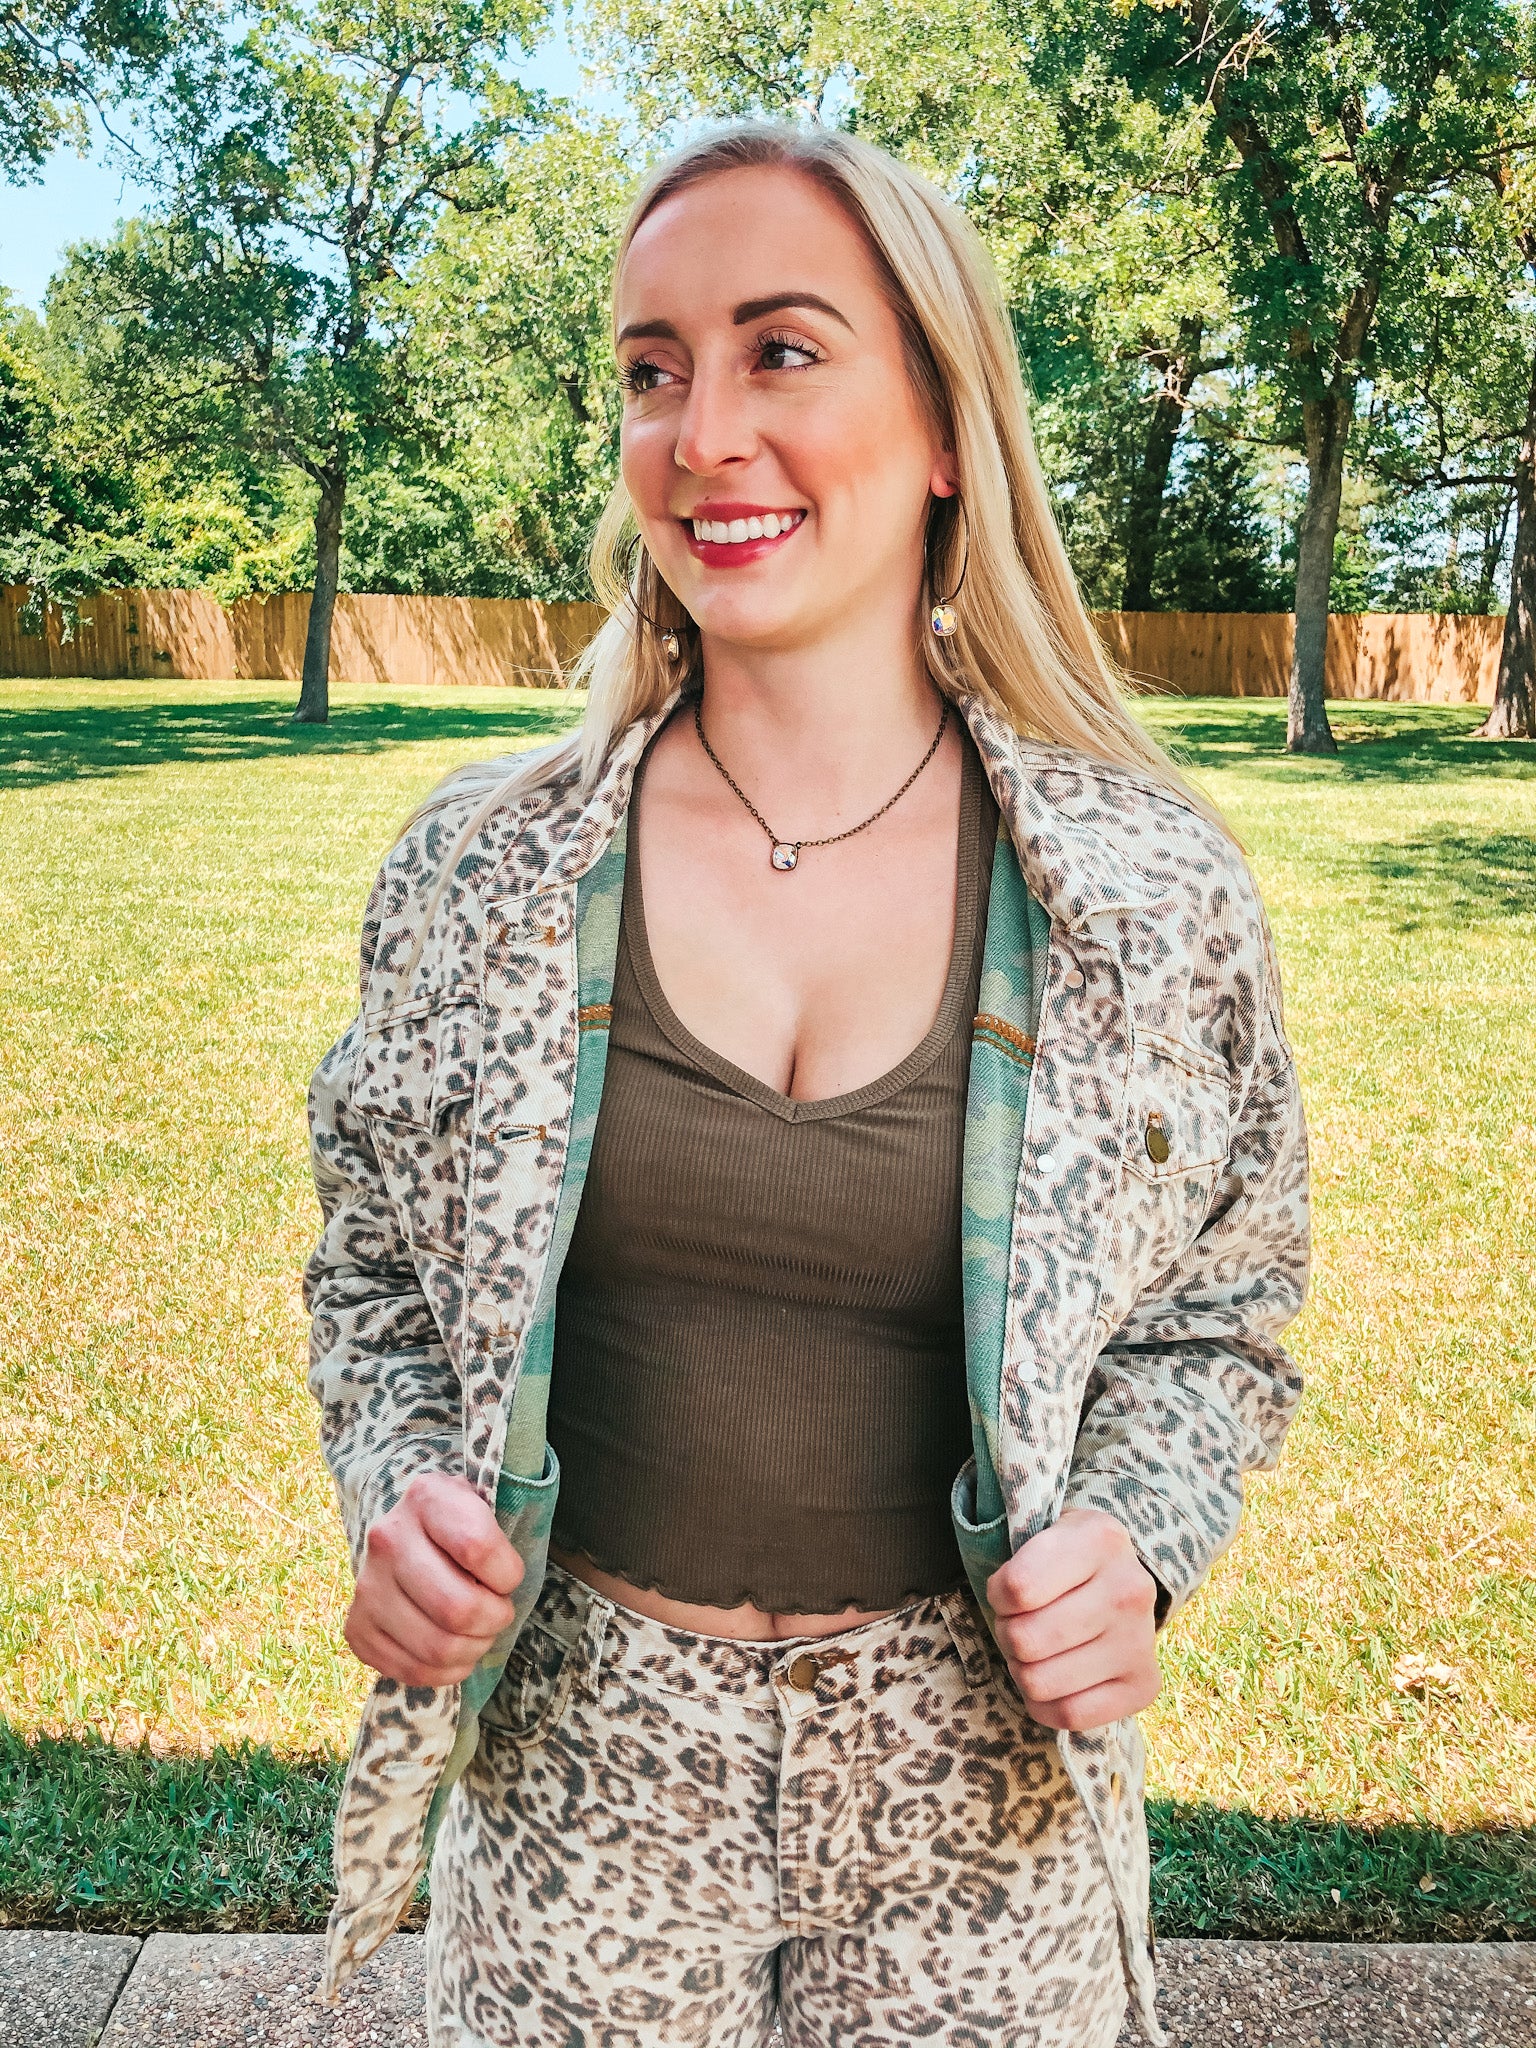 On The Upward Denim Button Up Jacket in Leopard - Giddy Up Glamour Boutique